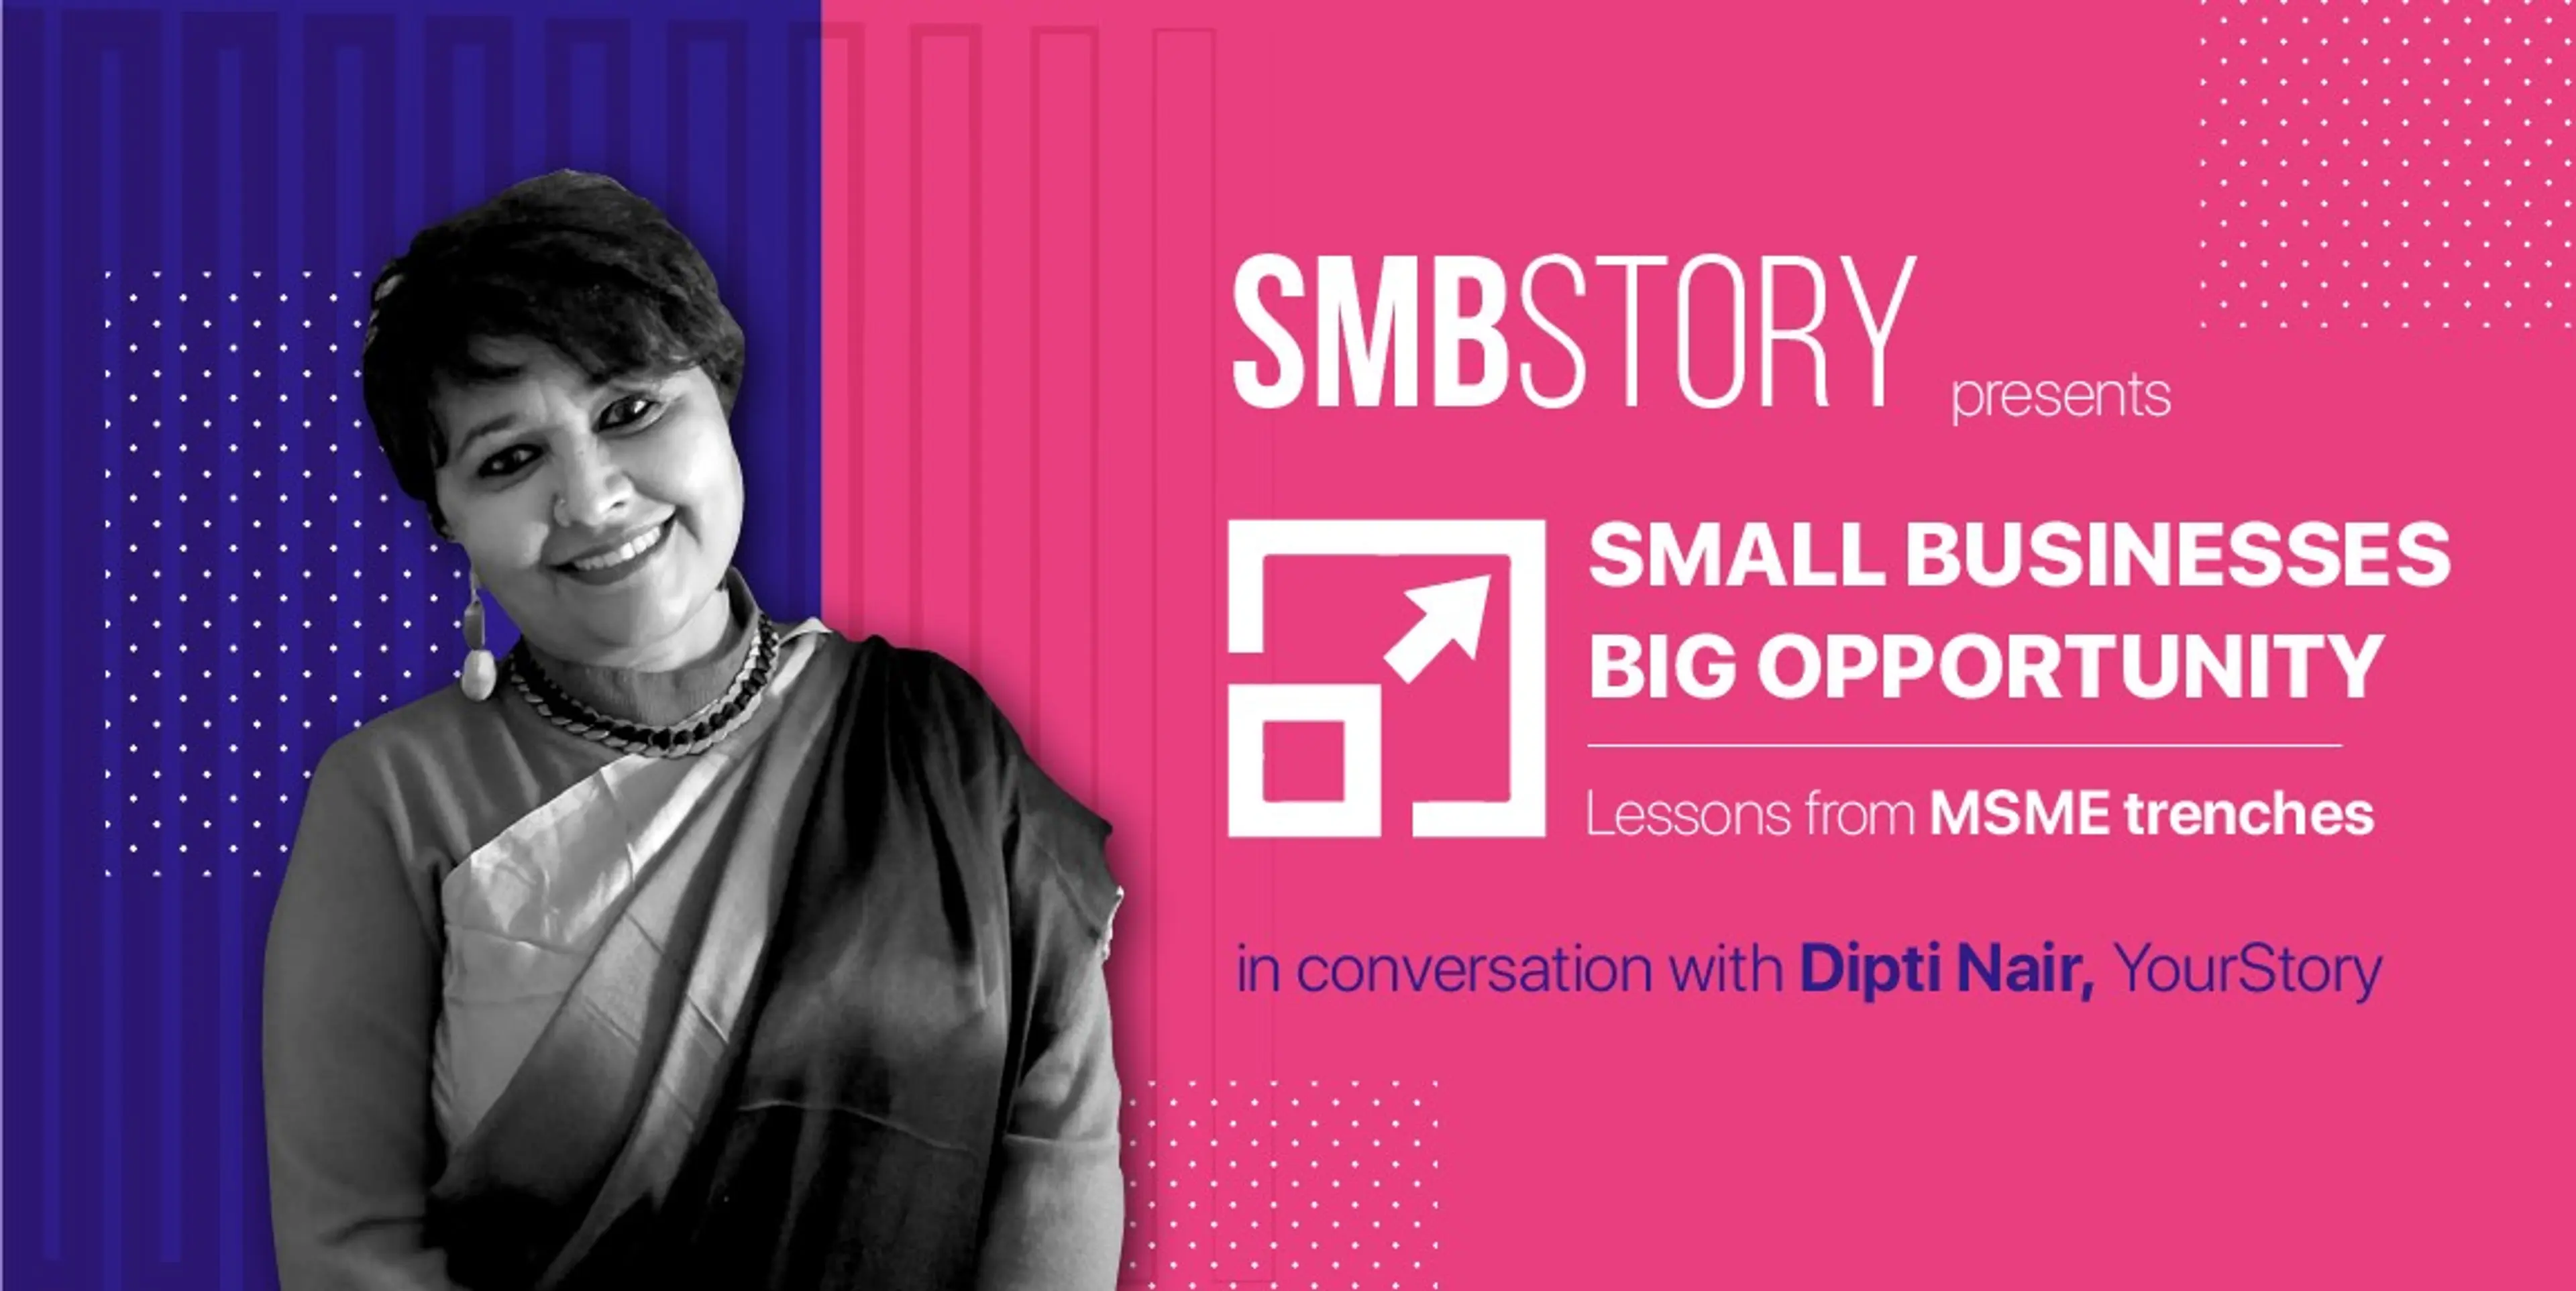 Small Businesses, Big Opportunities, Lessons from the MSME trenches